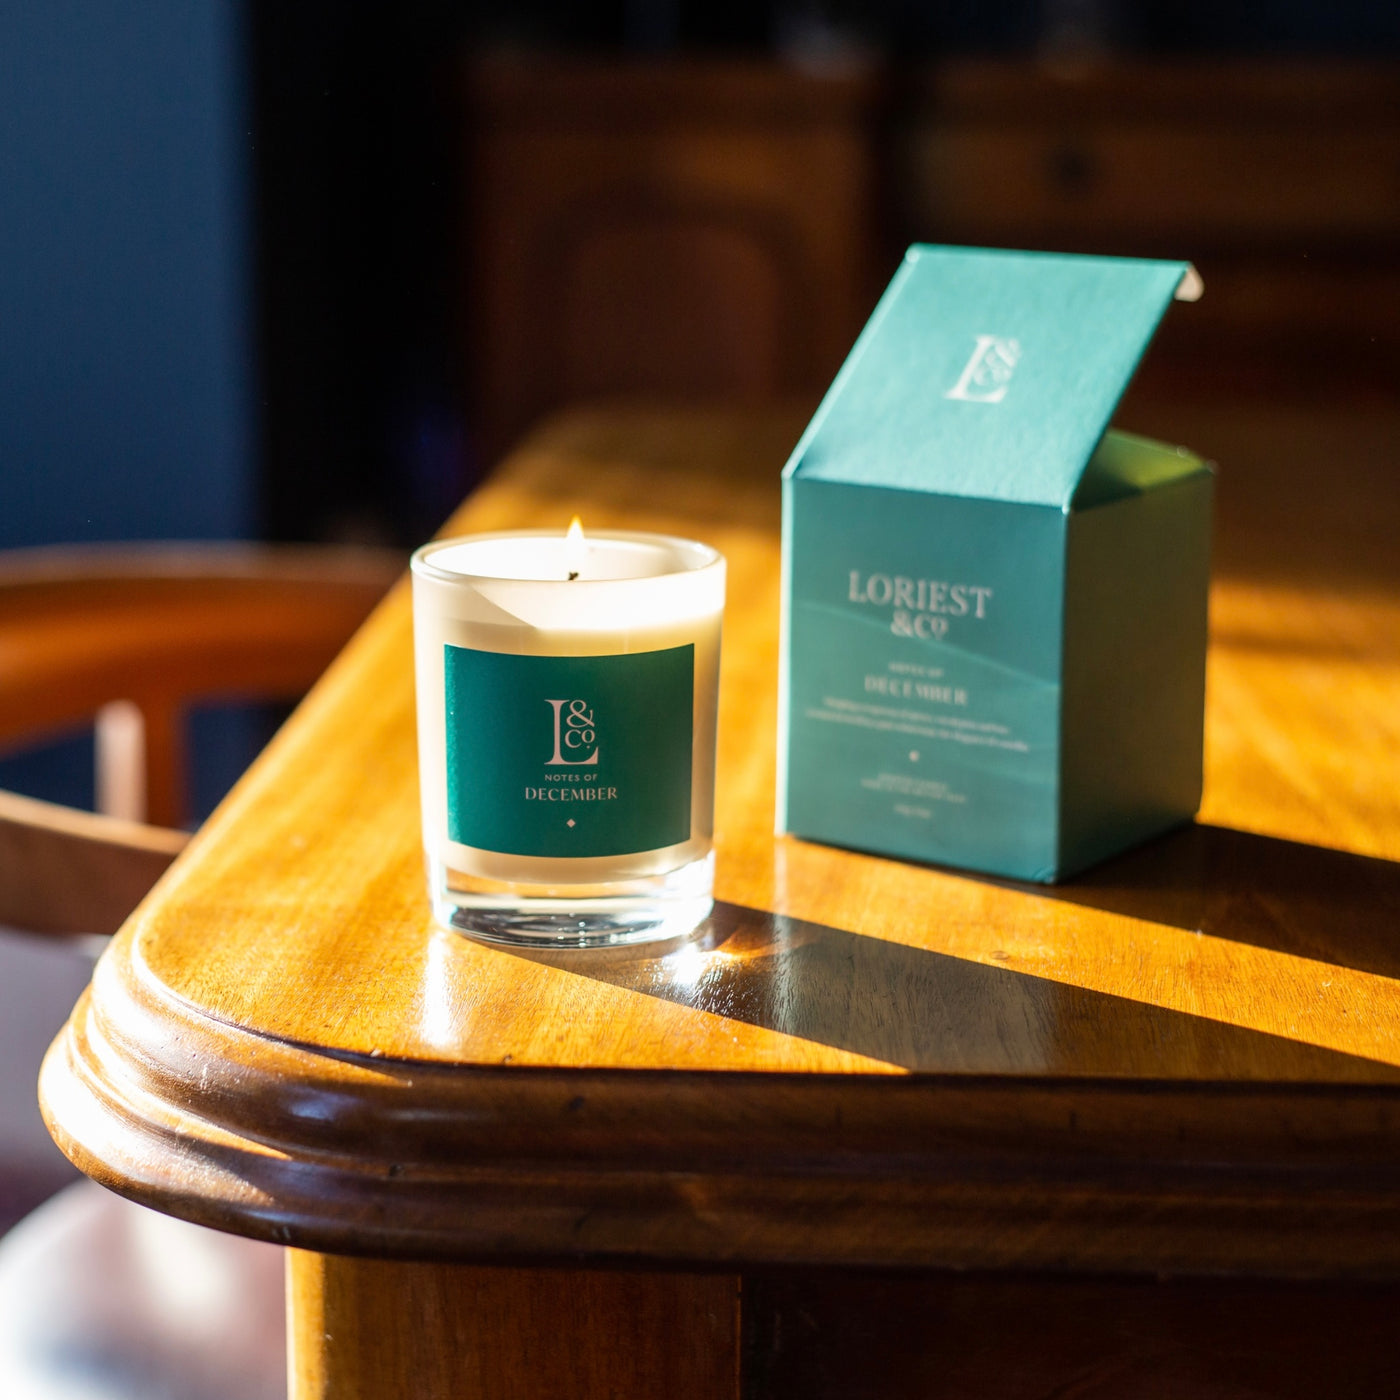 Loriest winter luxury candle to scent your home with the essence of an evergreen forest, and hints of bay and eucalyptus  as well as the beauty of the gently scented winter camellia flower. 215g of plant-based wax. Hand-poured in England. 